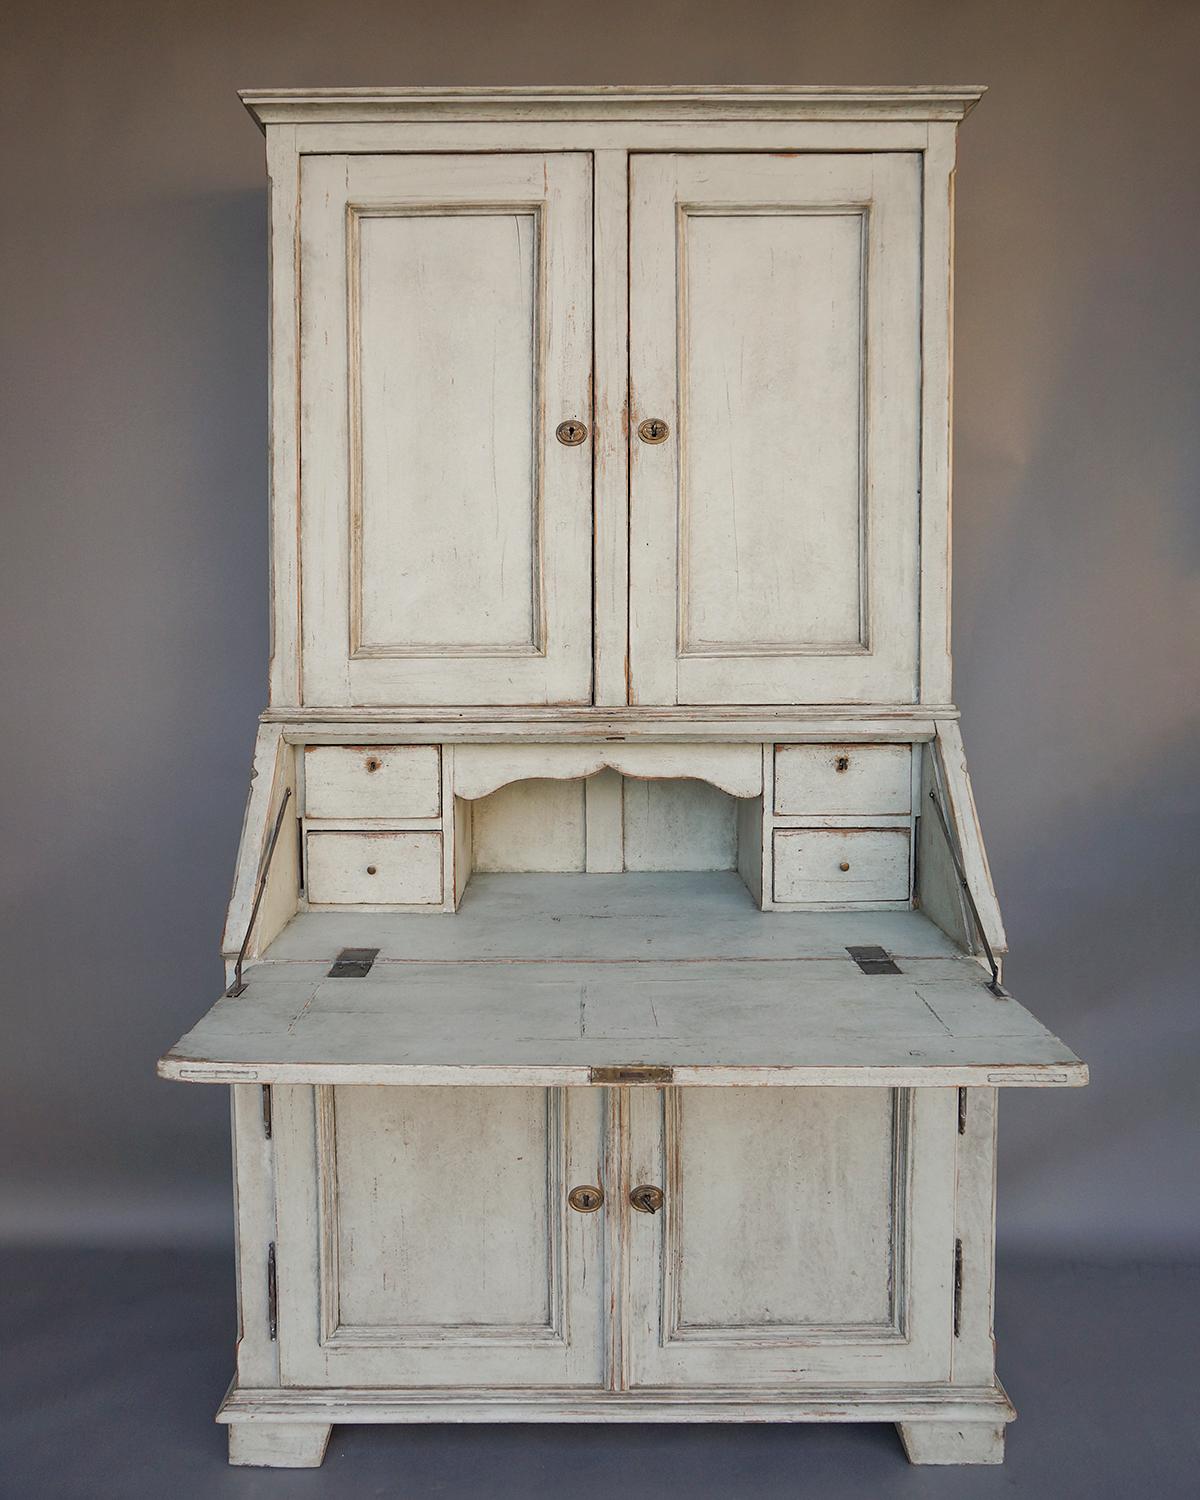 Two-part secretary, Sweden circa 1840, with paneled doors top and bottom and matching panels on the slant front. The upper section has a simple molded cornice and two locking interior compartments, each with a pair of fixed shelves. The left side